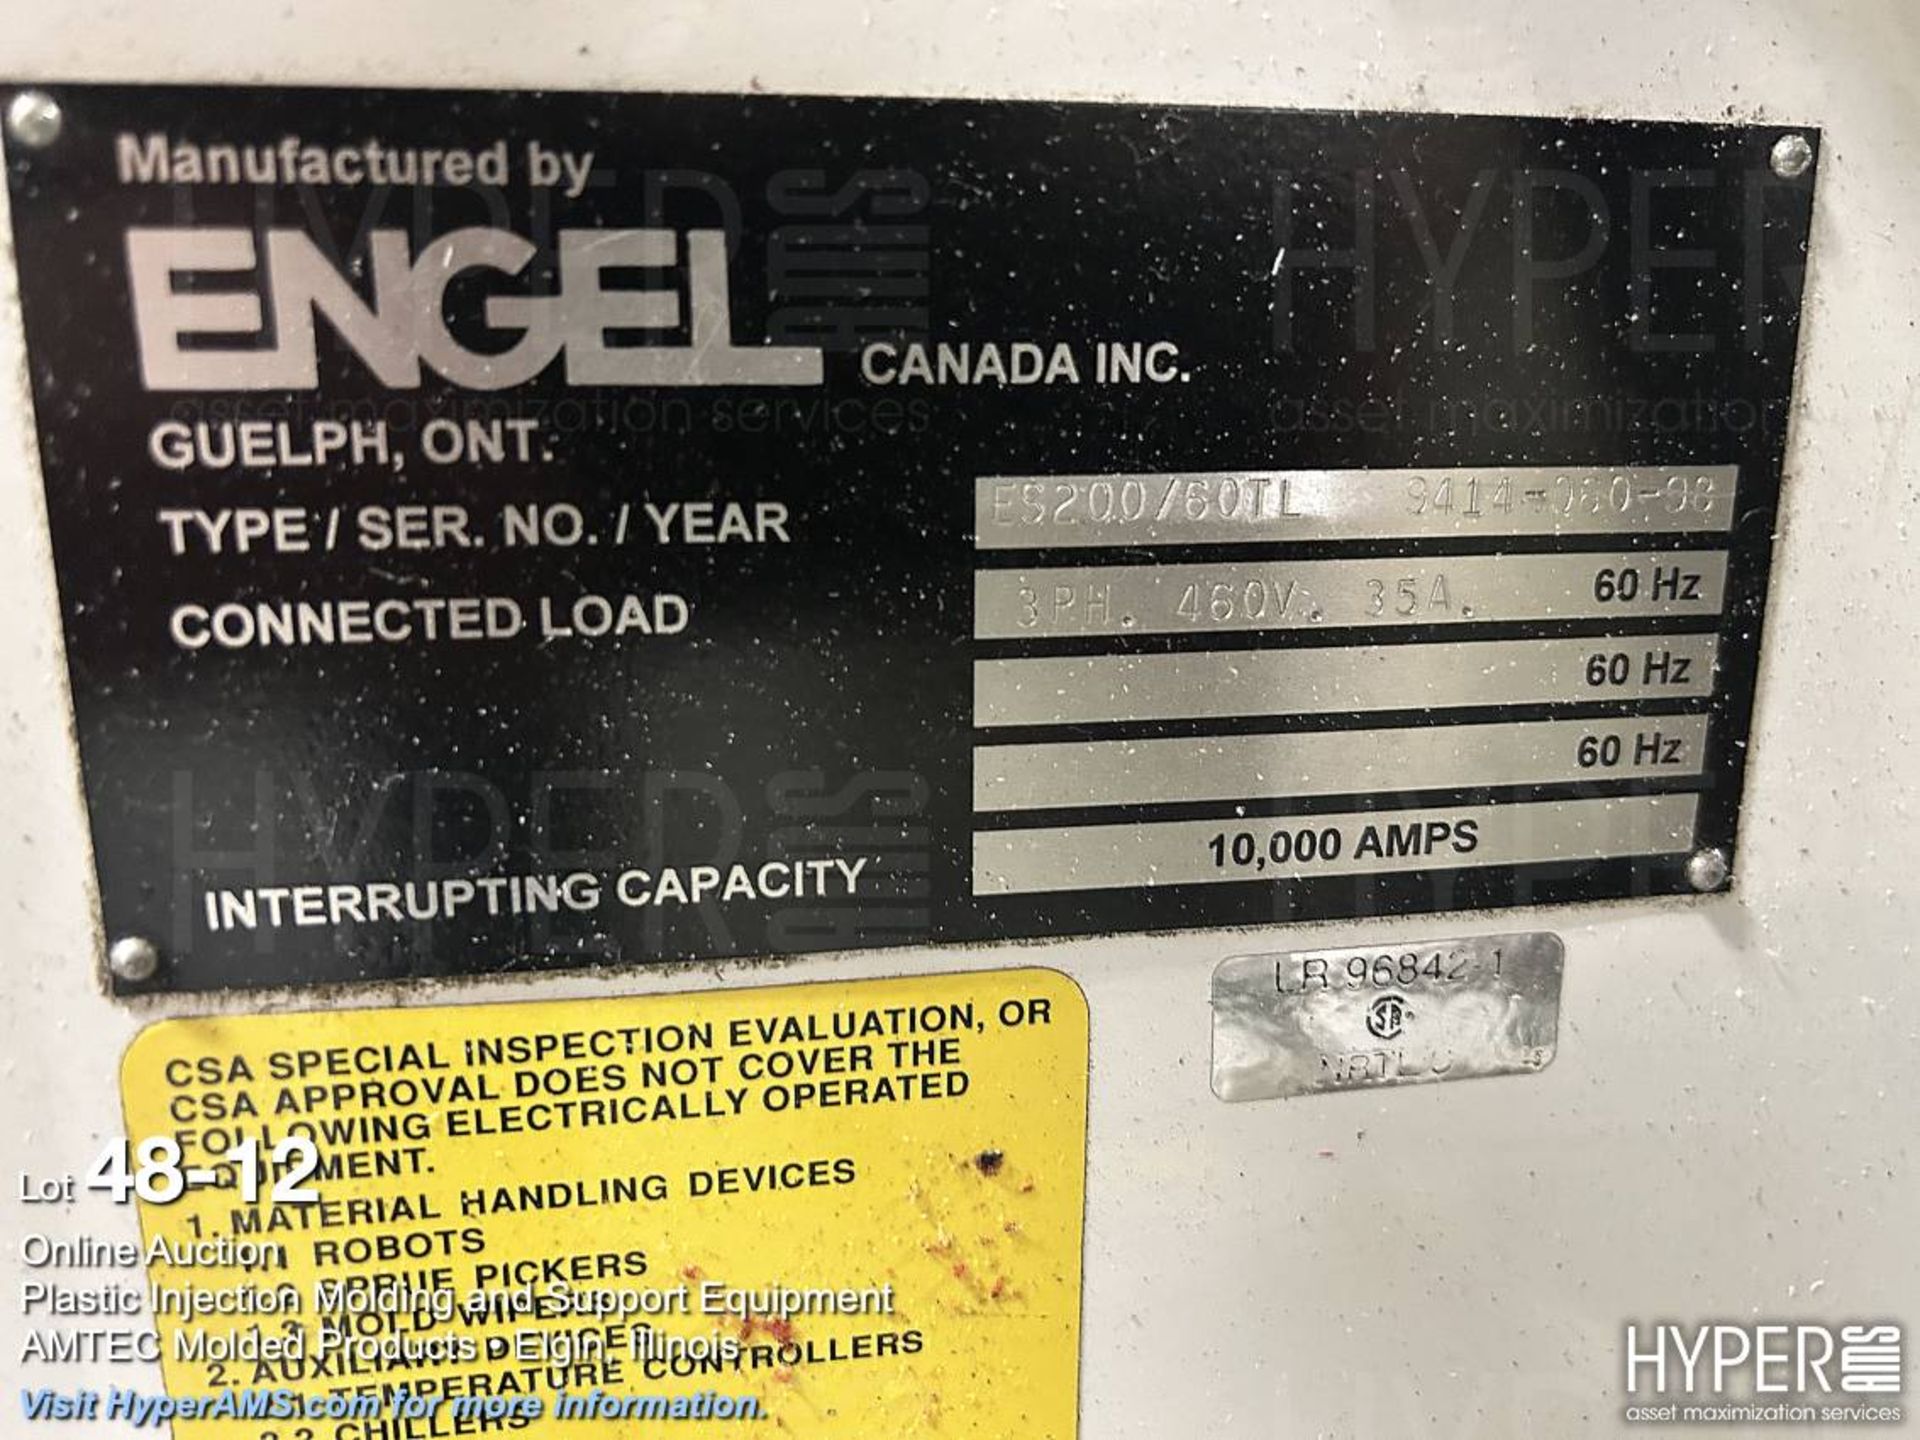 Engel ES200/60TL toggle clamp plastic injection molding machine - Image 12 of 16